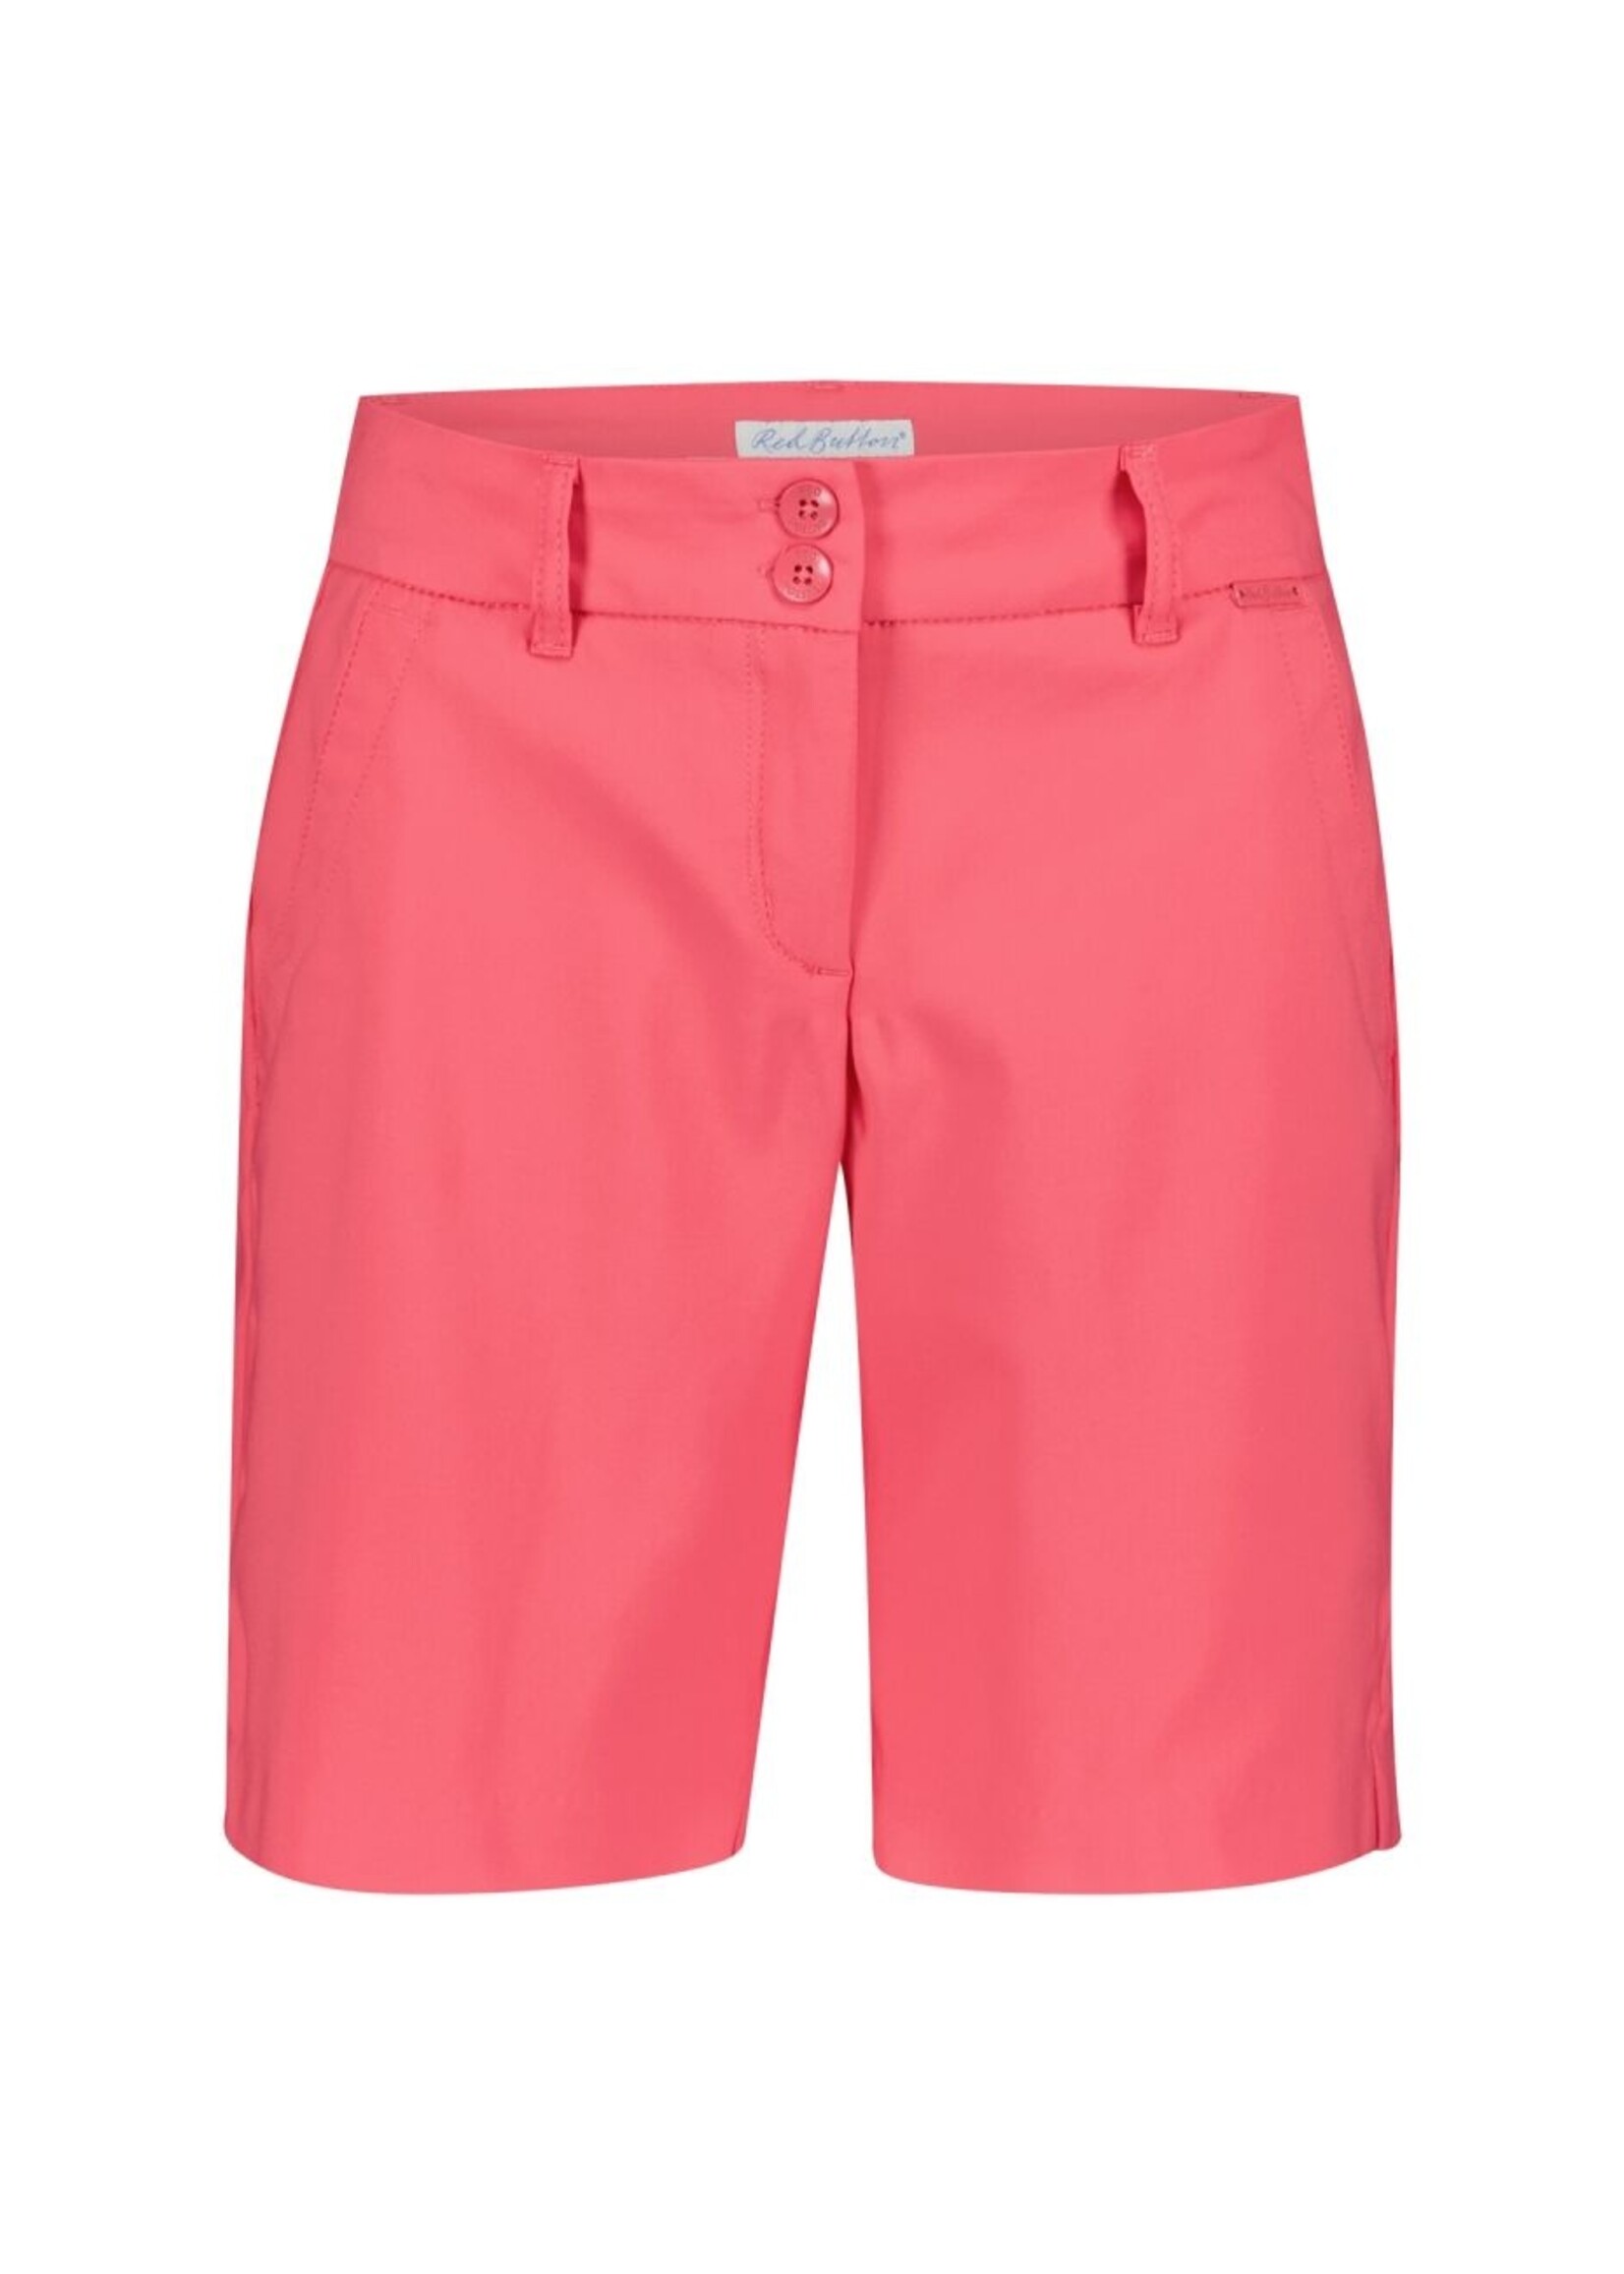 Red Button Short Ava - Coral